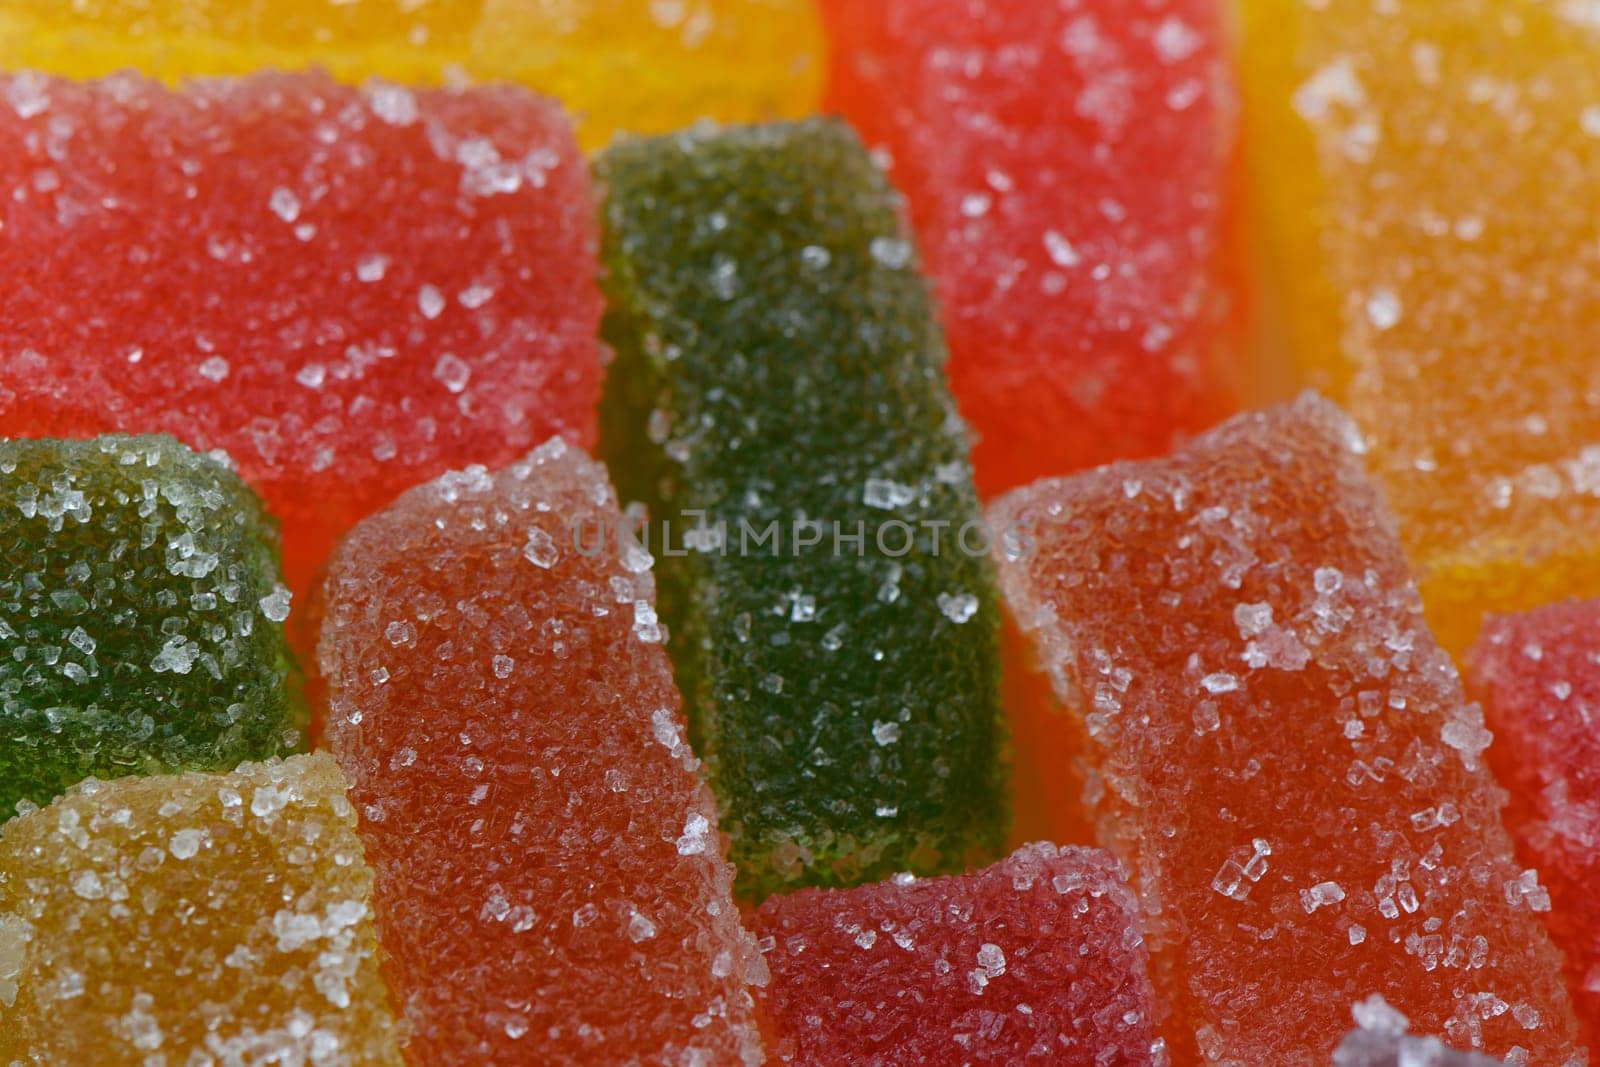 multi-colored marmalade pieces in sugar close-up. Studio photography, food photography